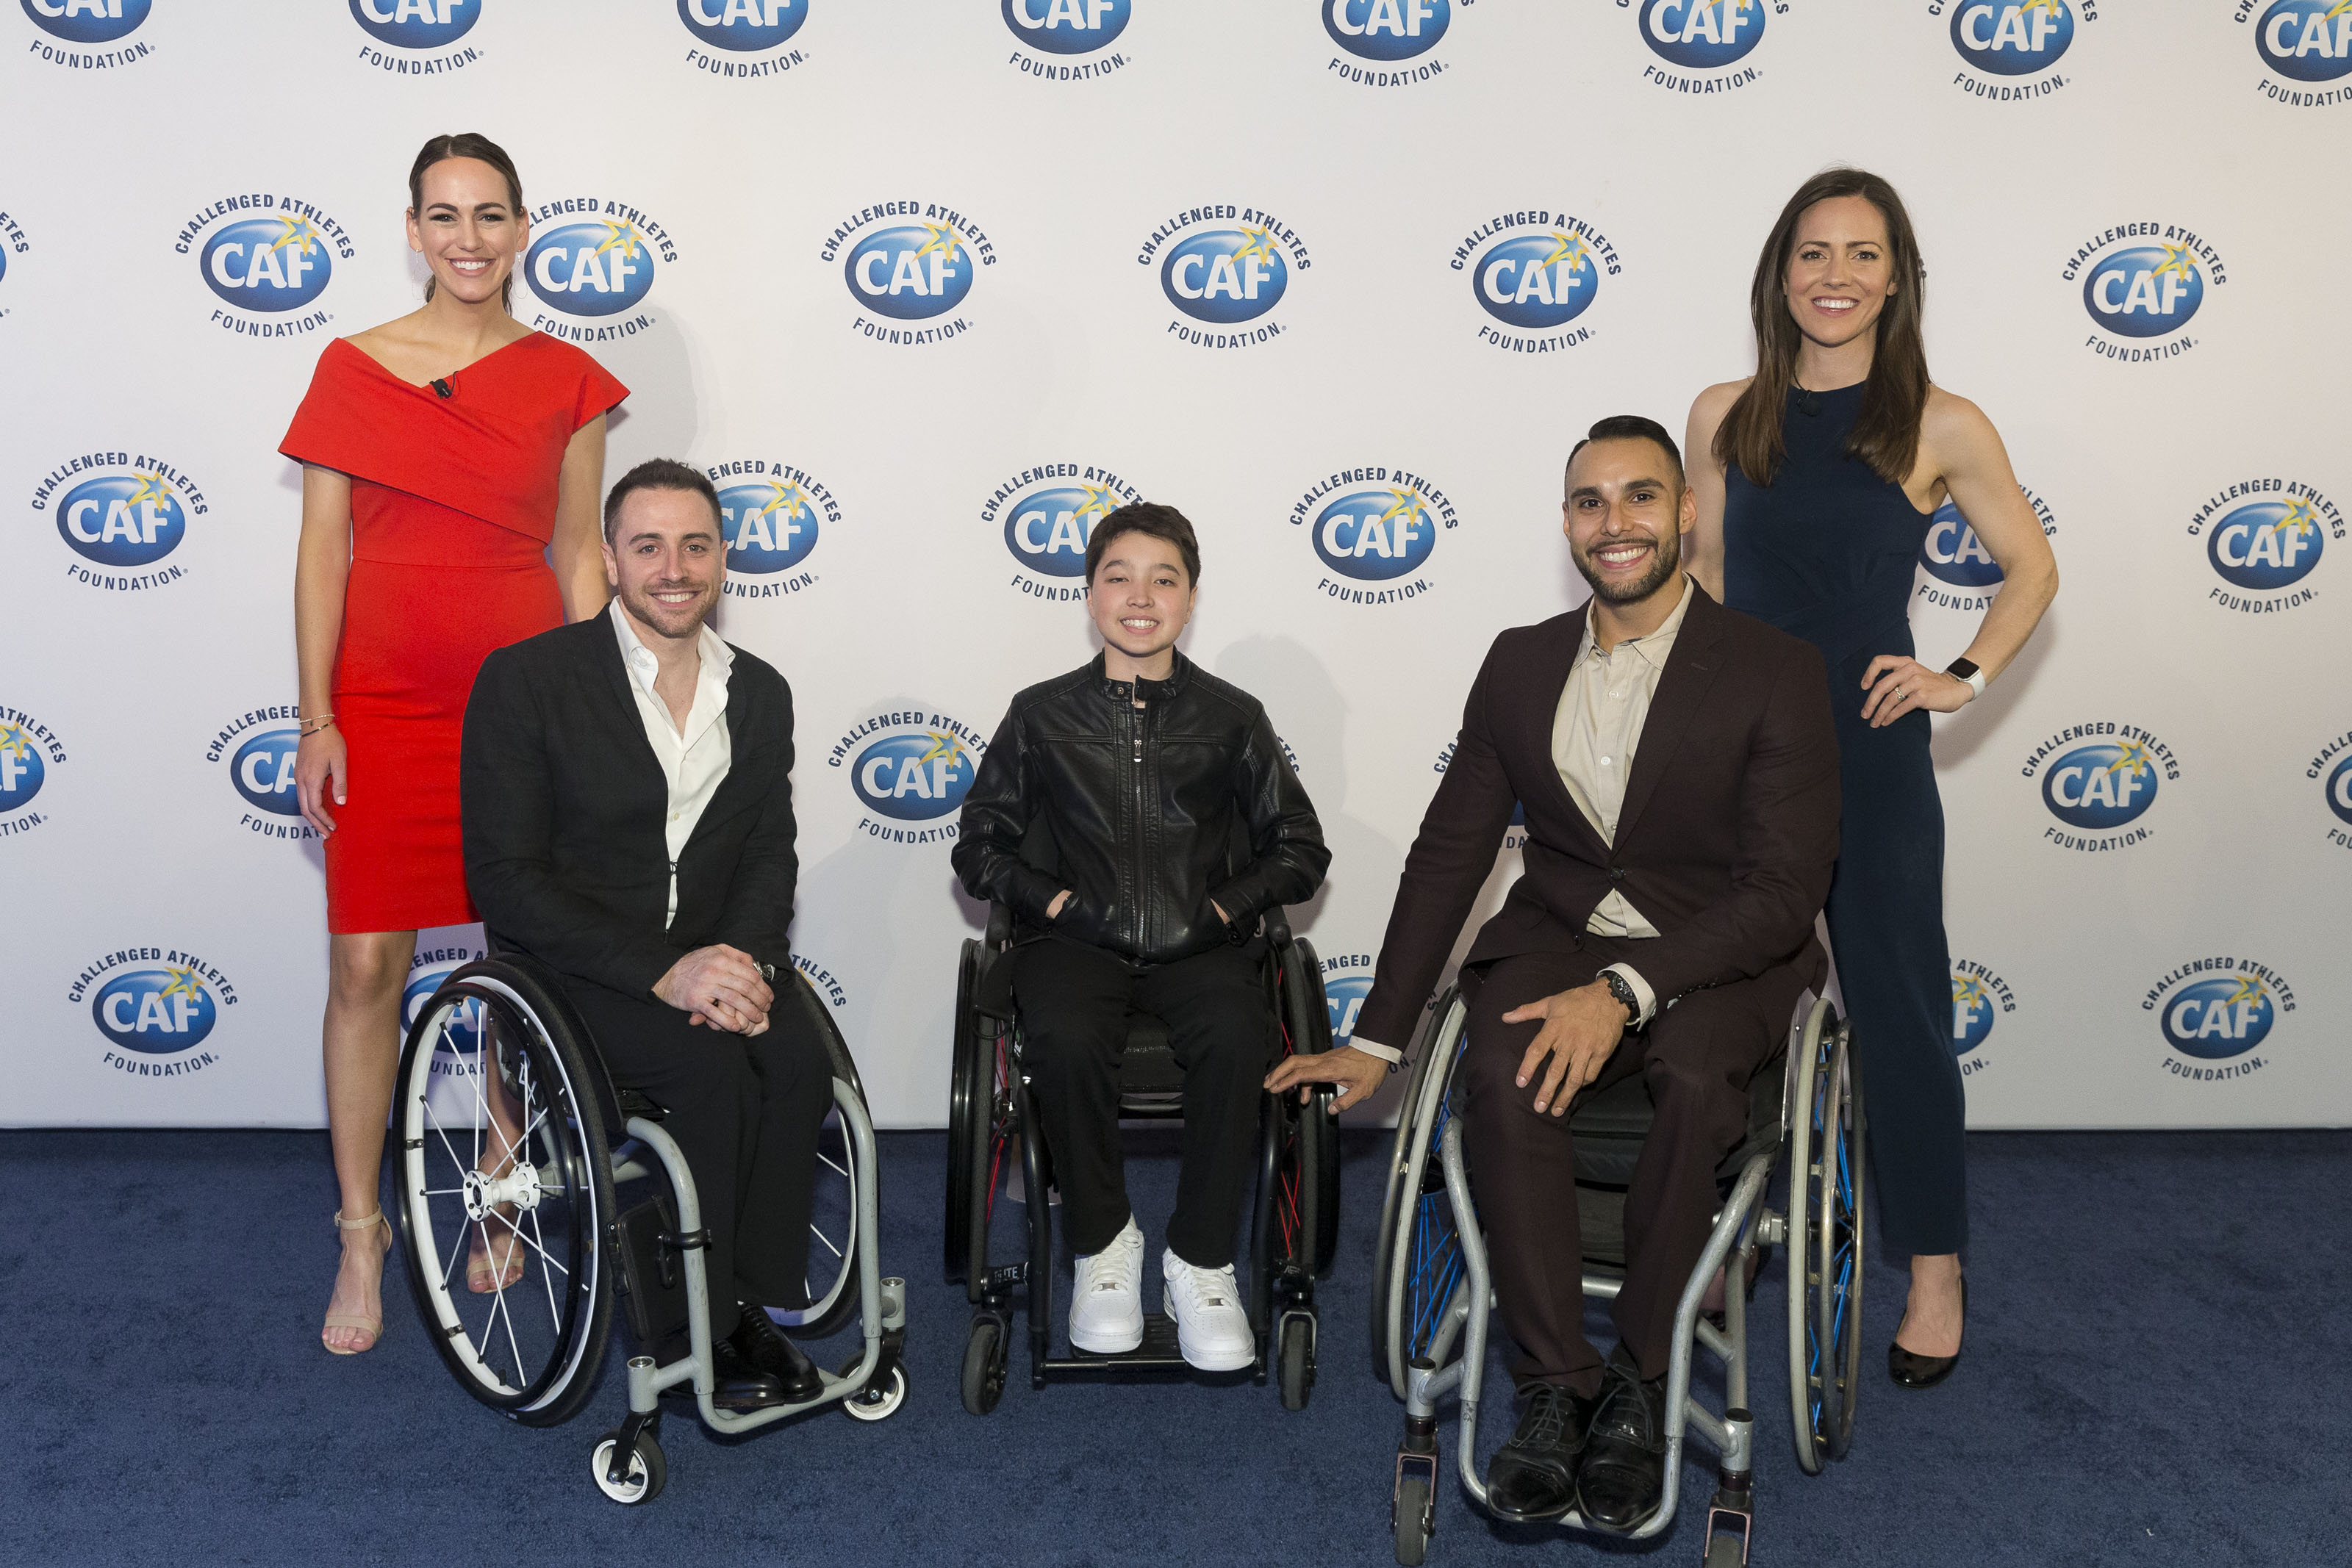 (Left to Right). SF 49ers host Laura Britt poses with Steve Serio, Team USA's Mens Wheelchair Basketball Co-Captian,  Devan Watkins, 12-year-old CAF Grantee from Menlo Park, Jorge Sanchez, Team USA Wheelchair Basketball player and Therese Viñal, SF Giants sportscaster.
